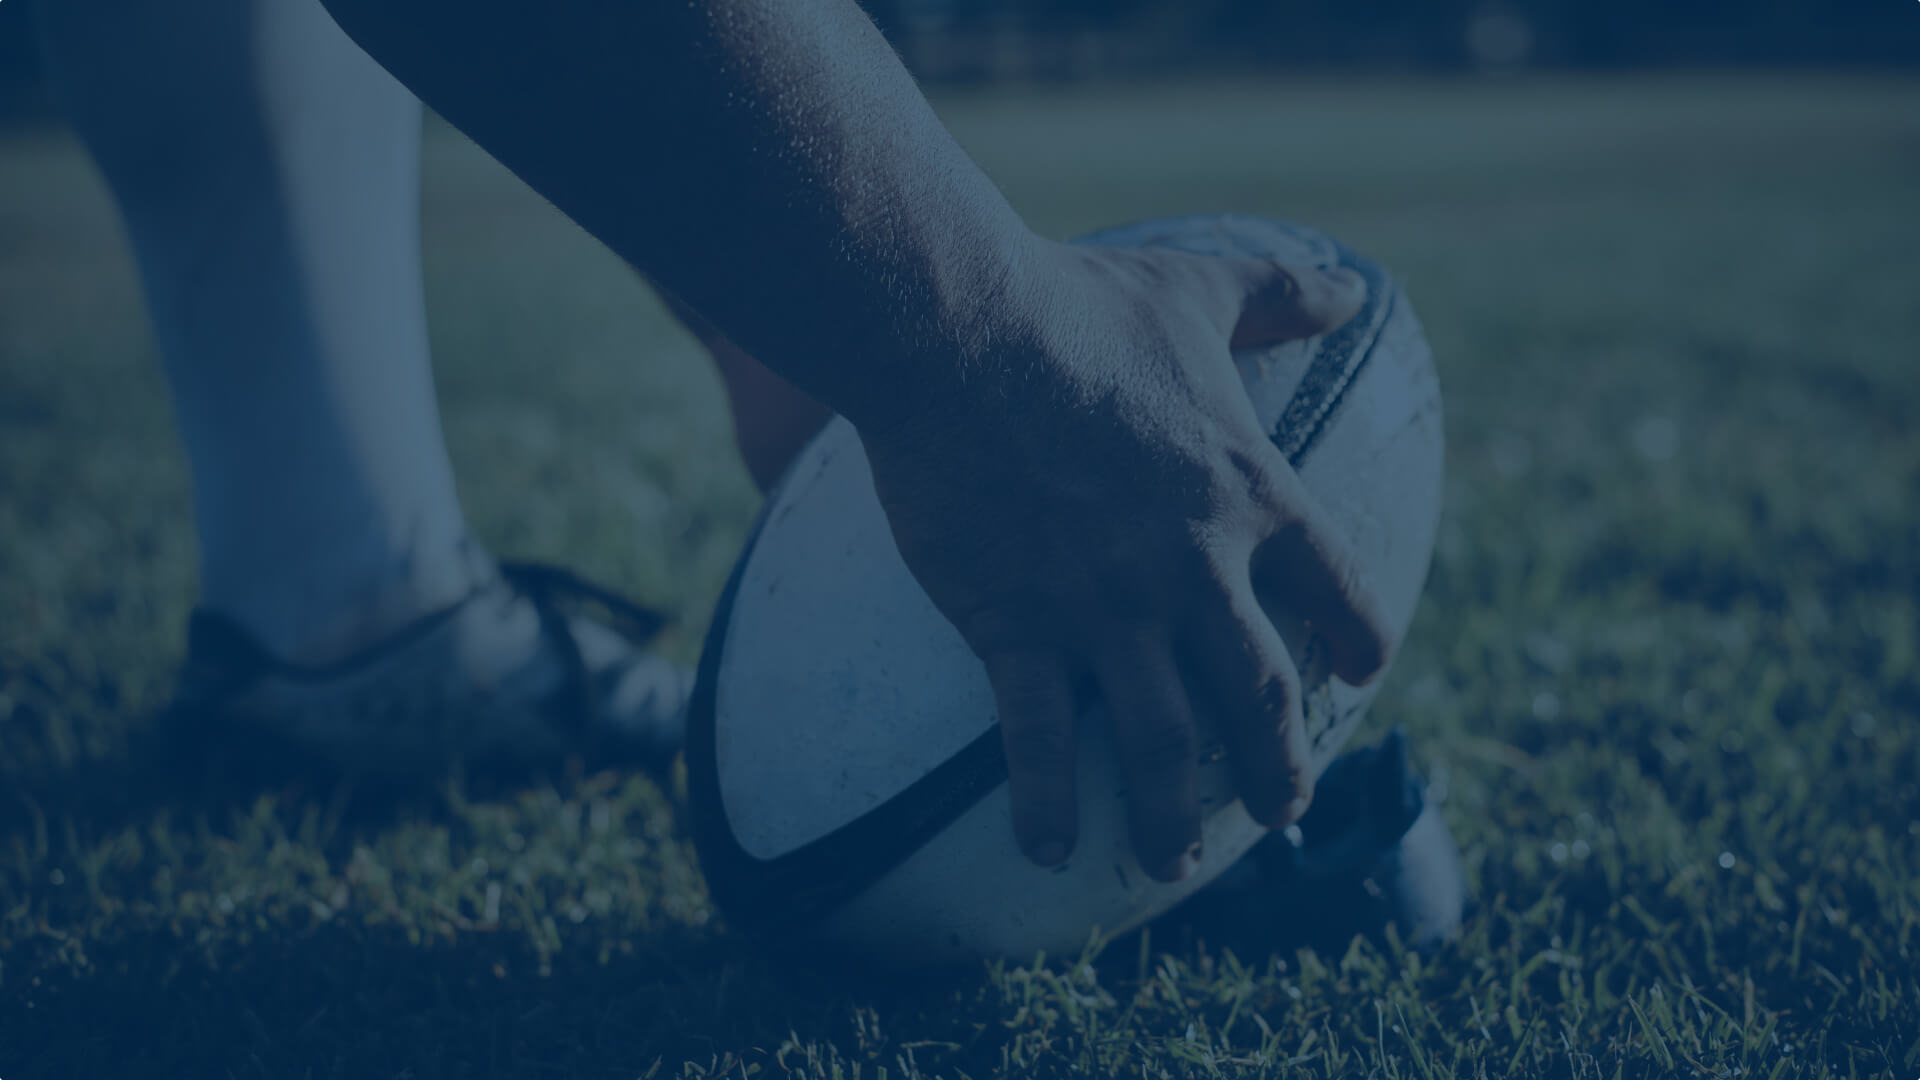 Hands holding a rugby ball on ground